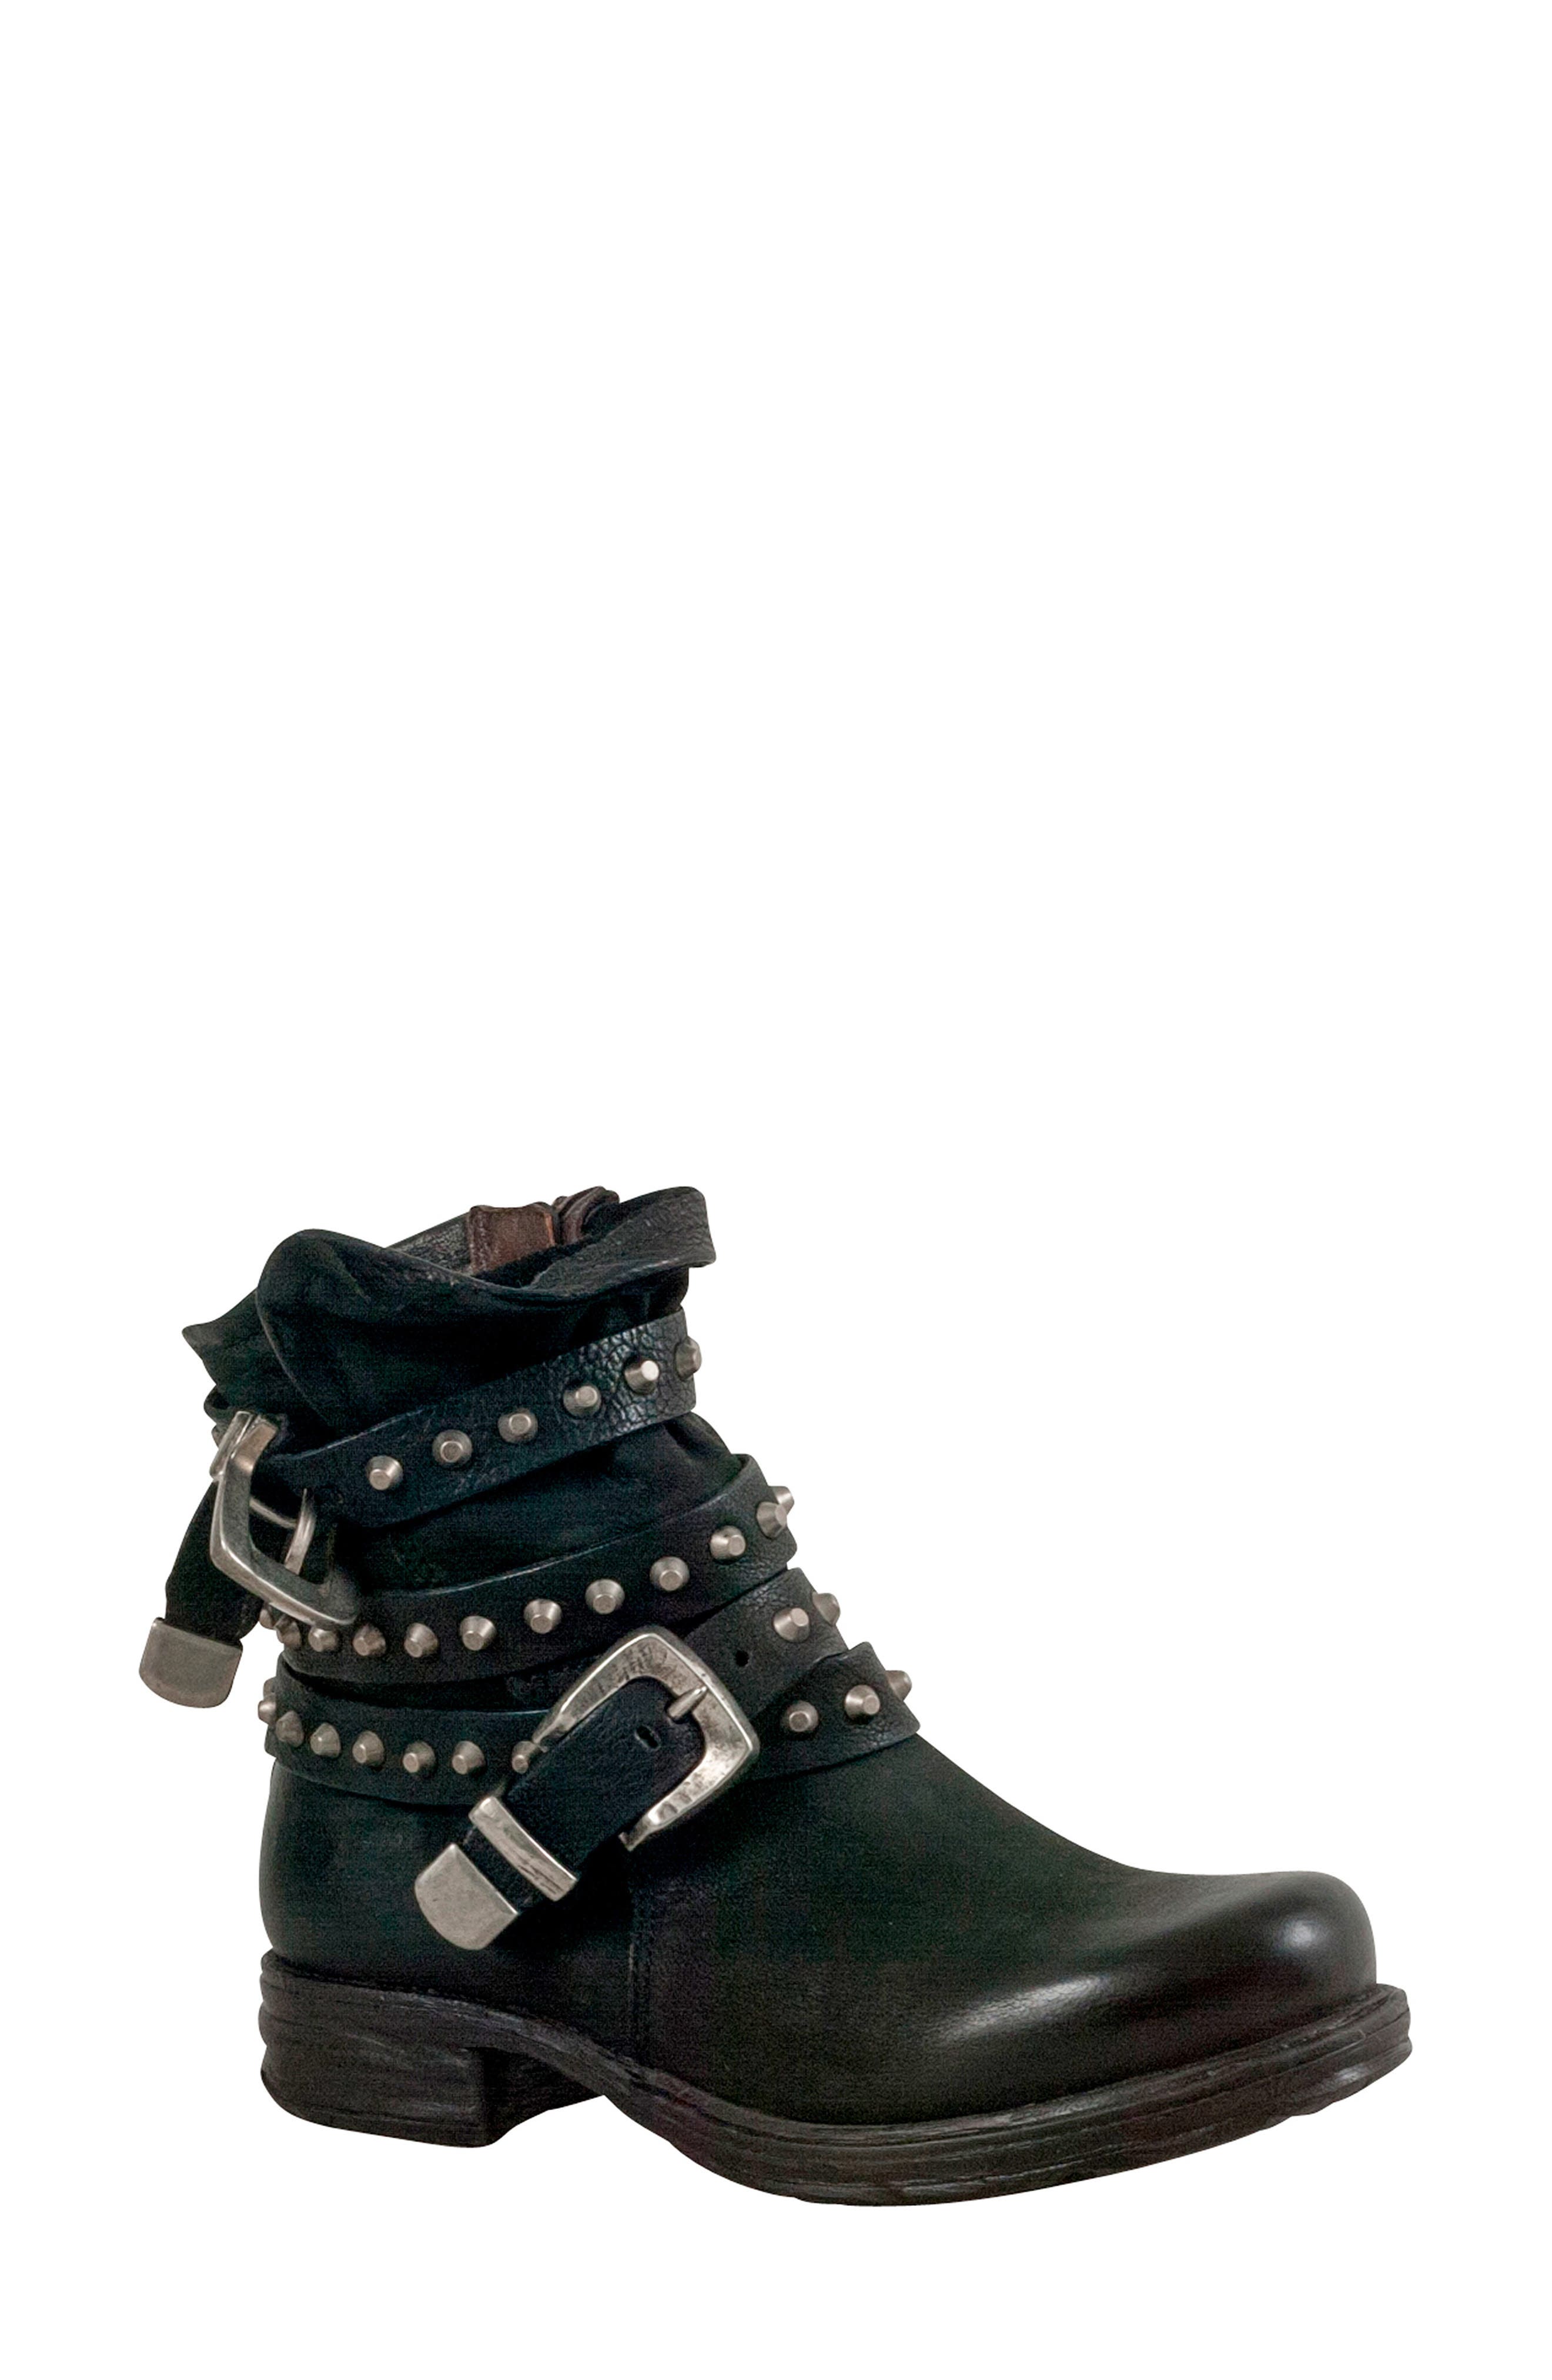 booties with studs and buckles